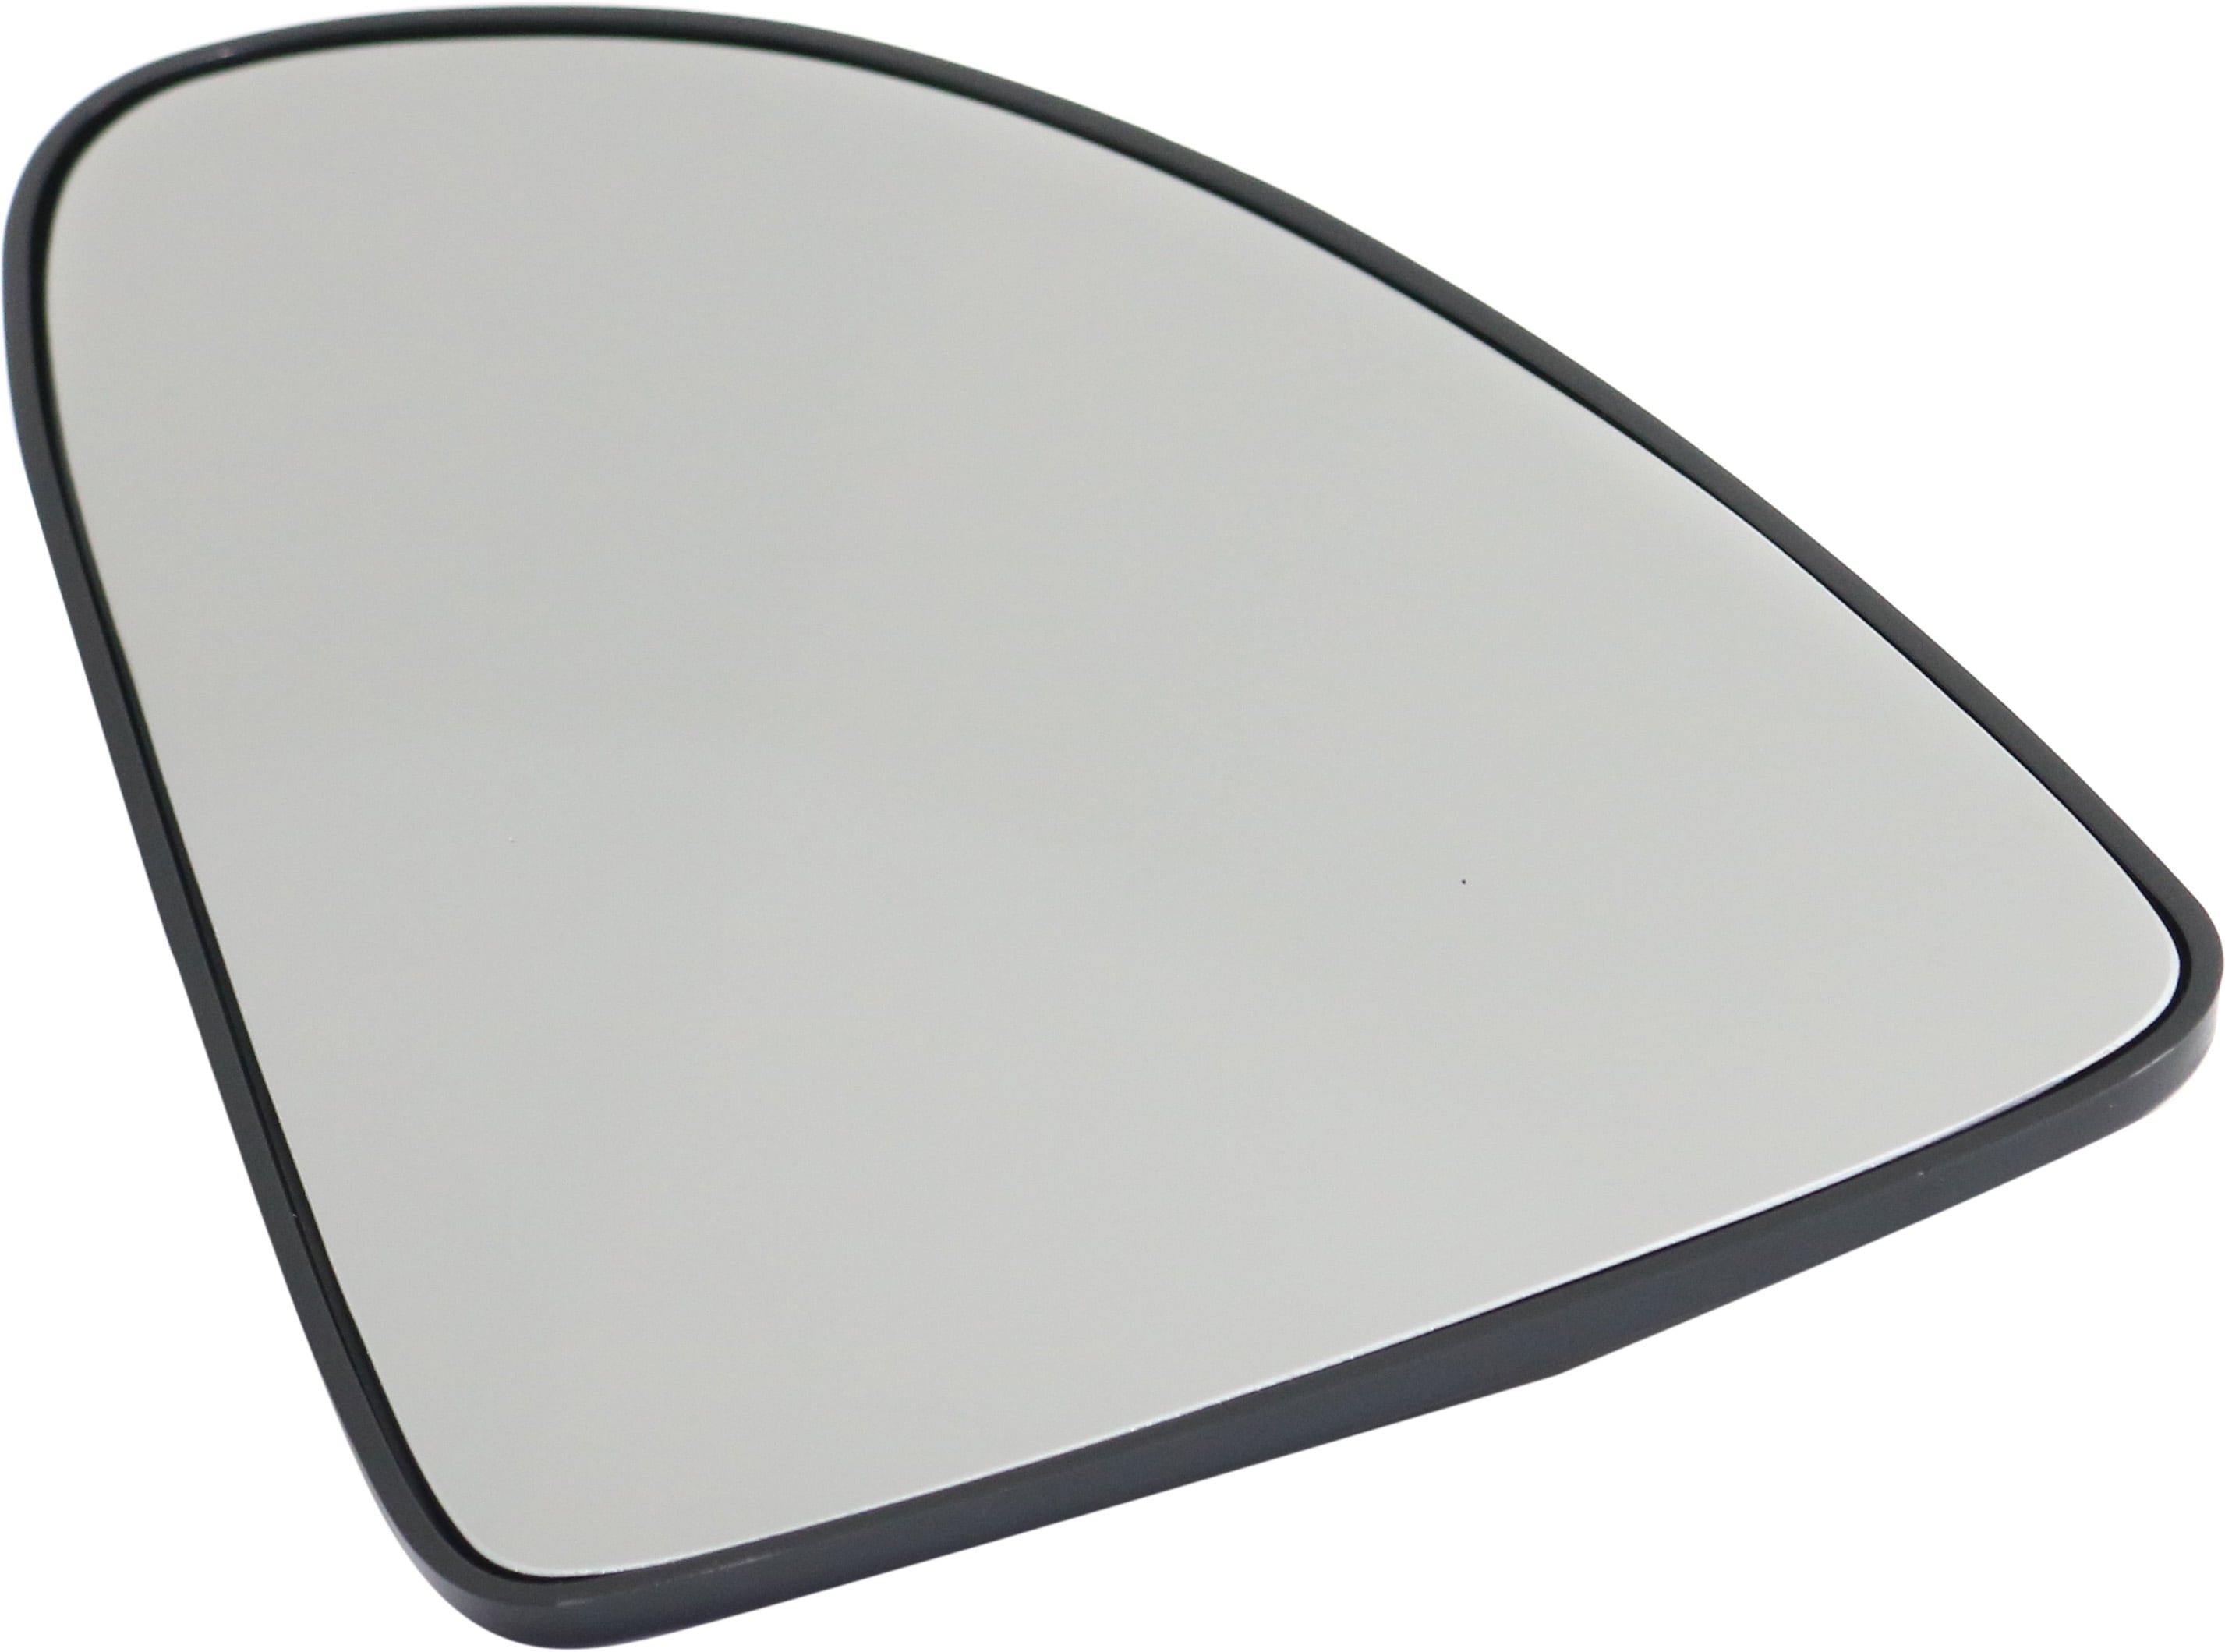 Details about   FOR 2004-2007 CHEVY MALIBU PONTIAC G6 FACTORY STYLE MIRROR GLASS LENS RIGHT RH